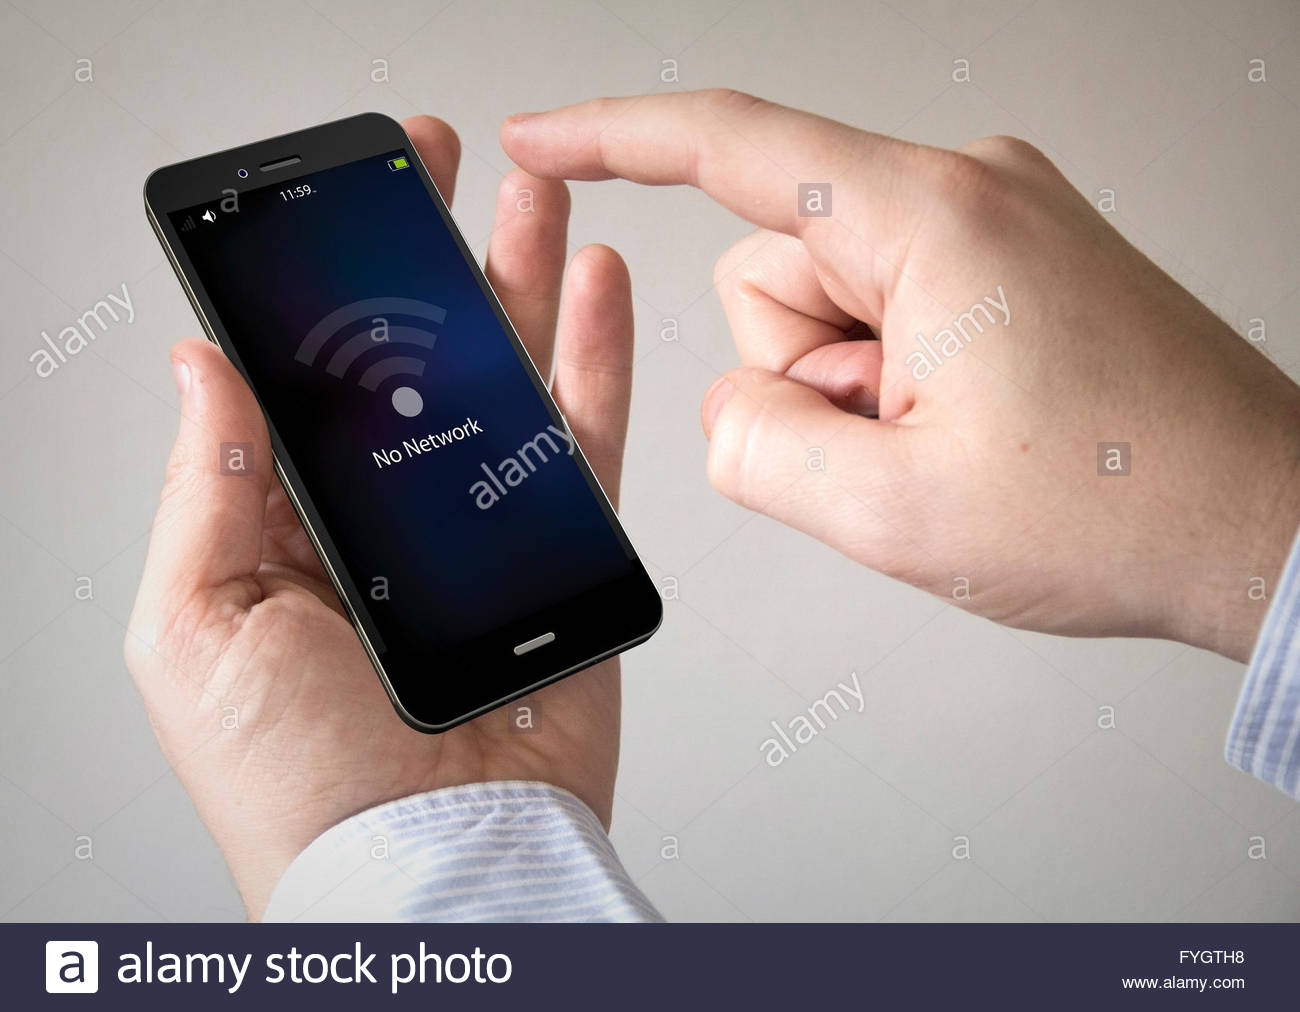 hand-touching-screen-on-modern-mobile-smart-phone-with-no-network-FYGTH8.jpg